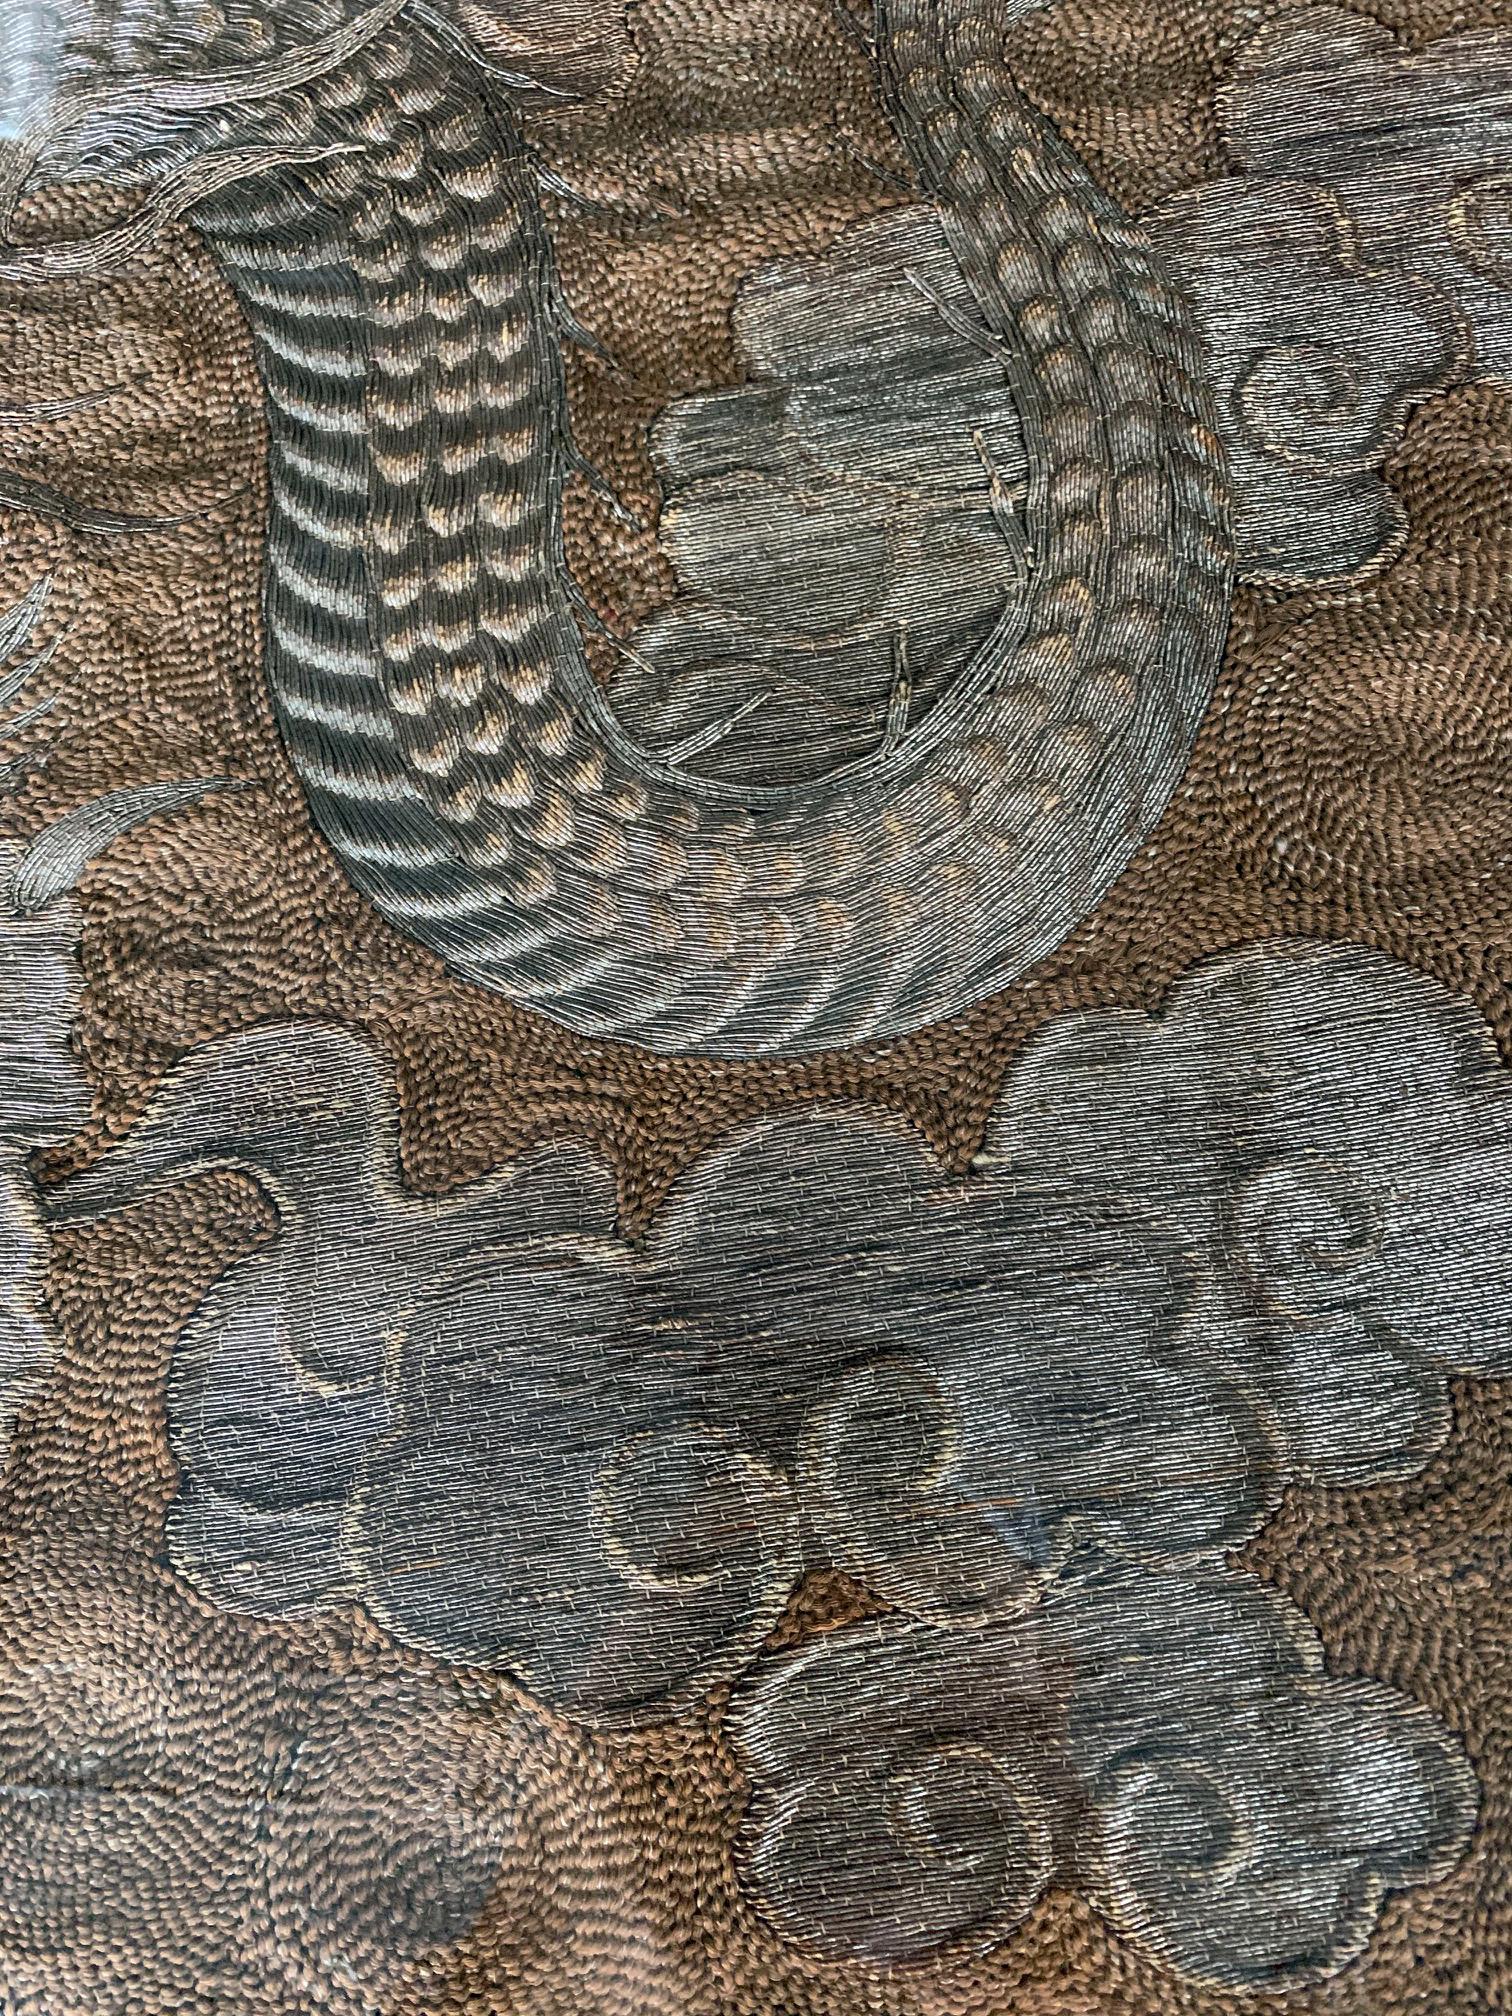 Large Framed Japanese Embroidery Dragon Tapestry In Good Condition For Sale In Atlanta, GA